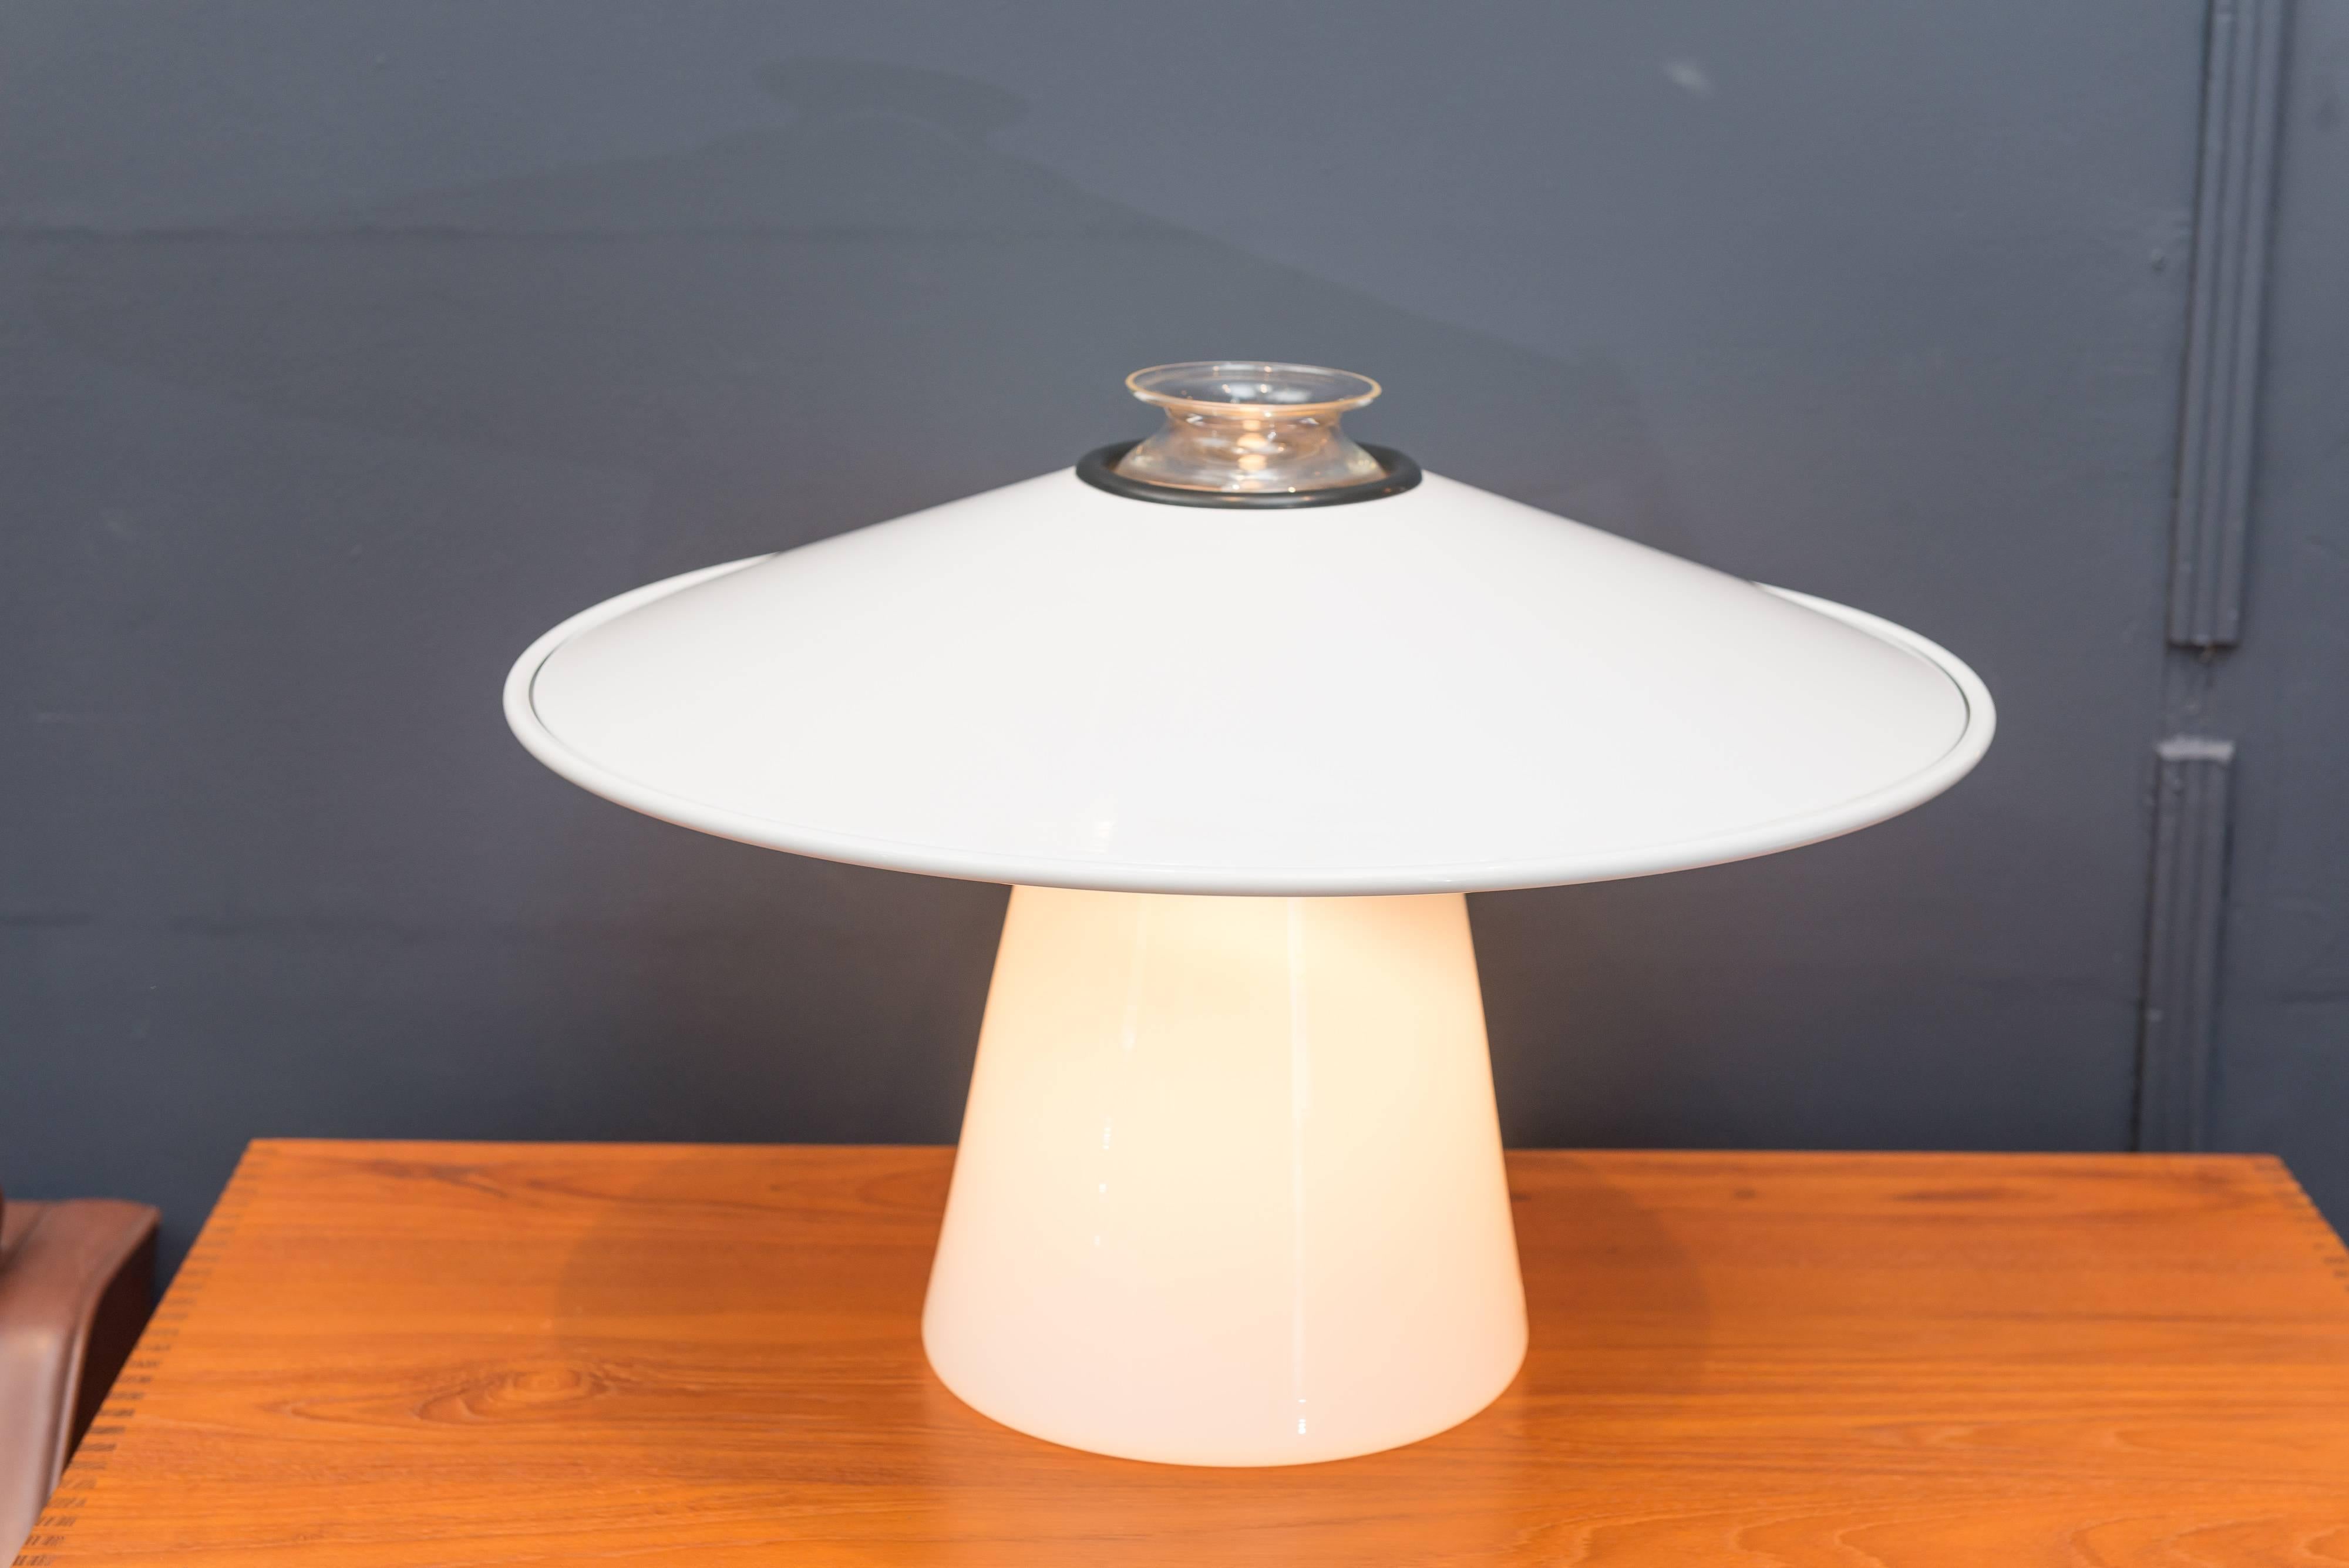 Stilnovo illuminated blown glass table with a white enamel adjustable tilting shade. Excellent condition, labeled.